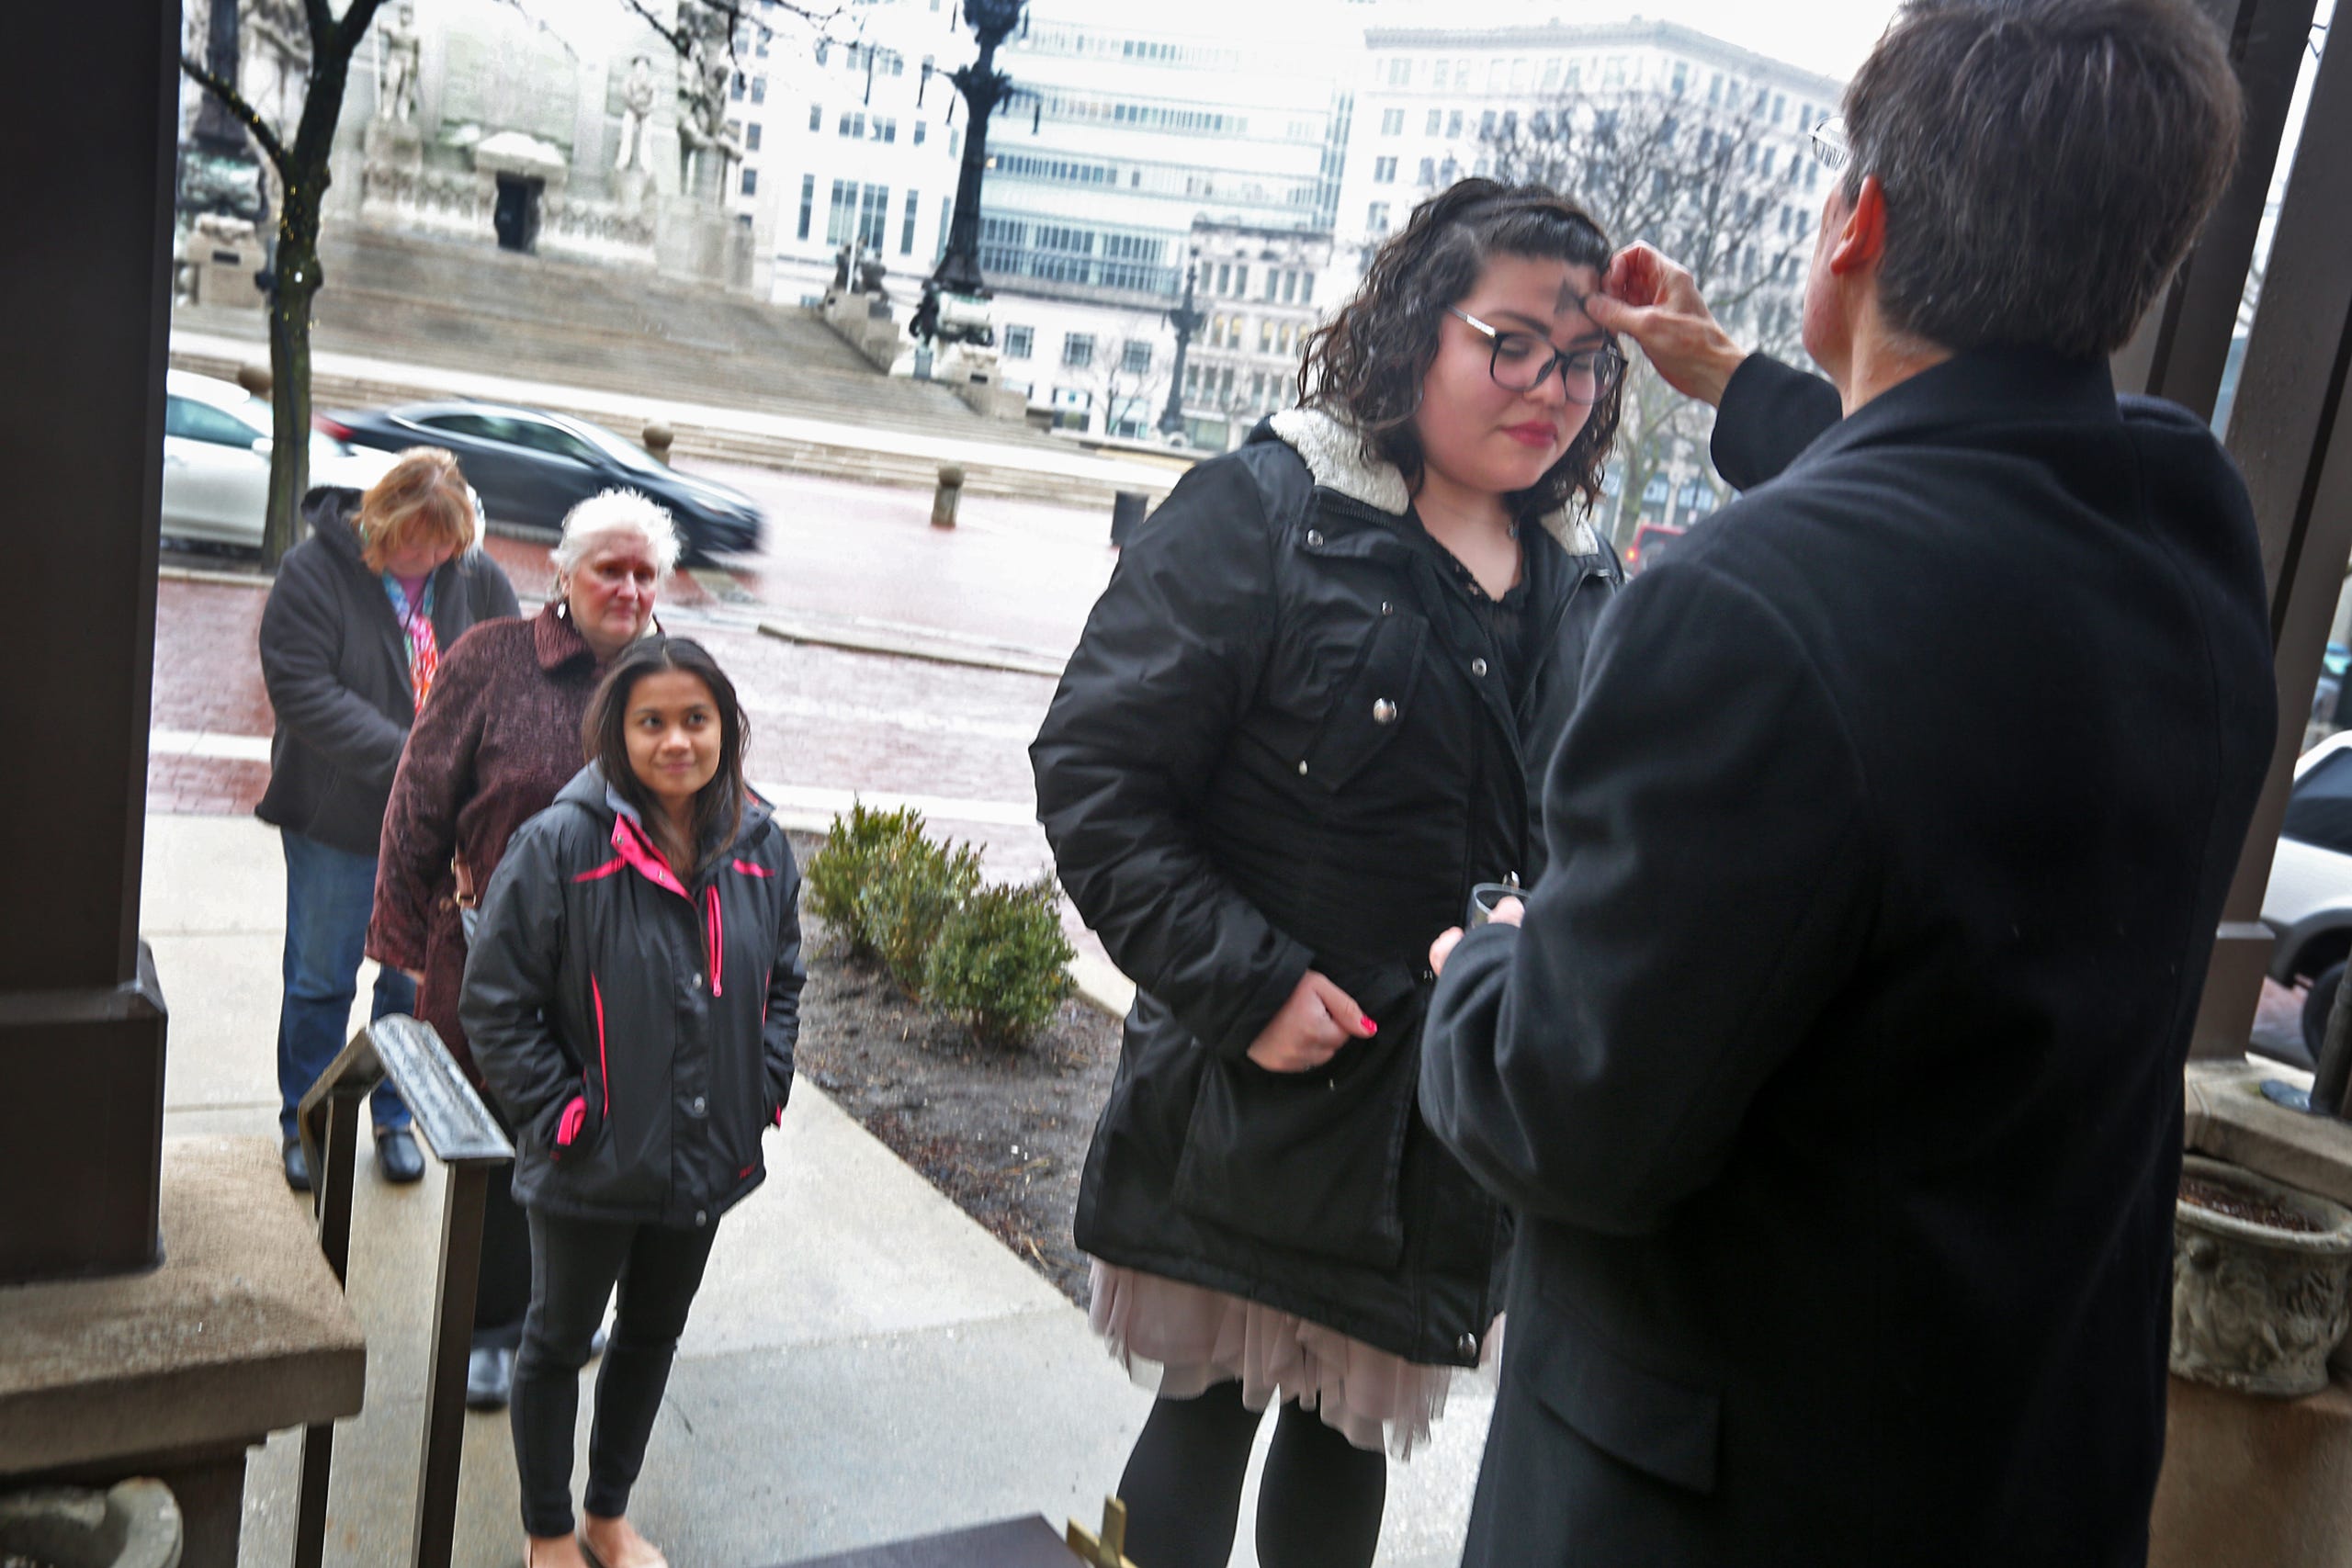 The Rev. Tom Kryder-Reid, right, signs the cross of ashes on the forehead of Siara Reyes, as others wait their turn, on Ash Wednesday "Ashes On The Go!" offered at Christ Church Cathedral on Monument Circle, on Feb. 14, 2018.  People could come up to receive the ashes and head on their way.